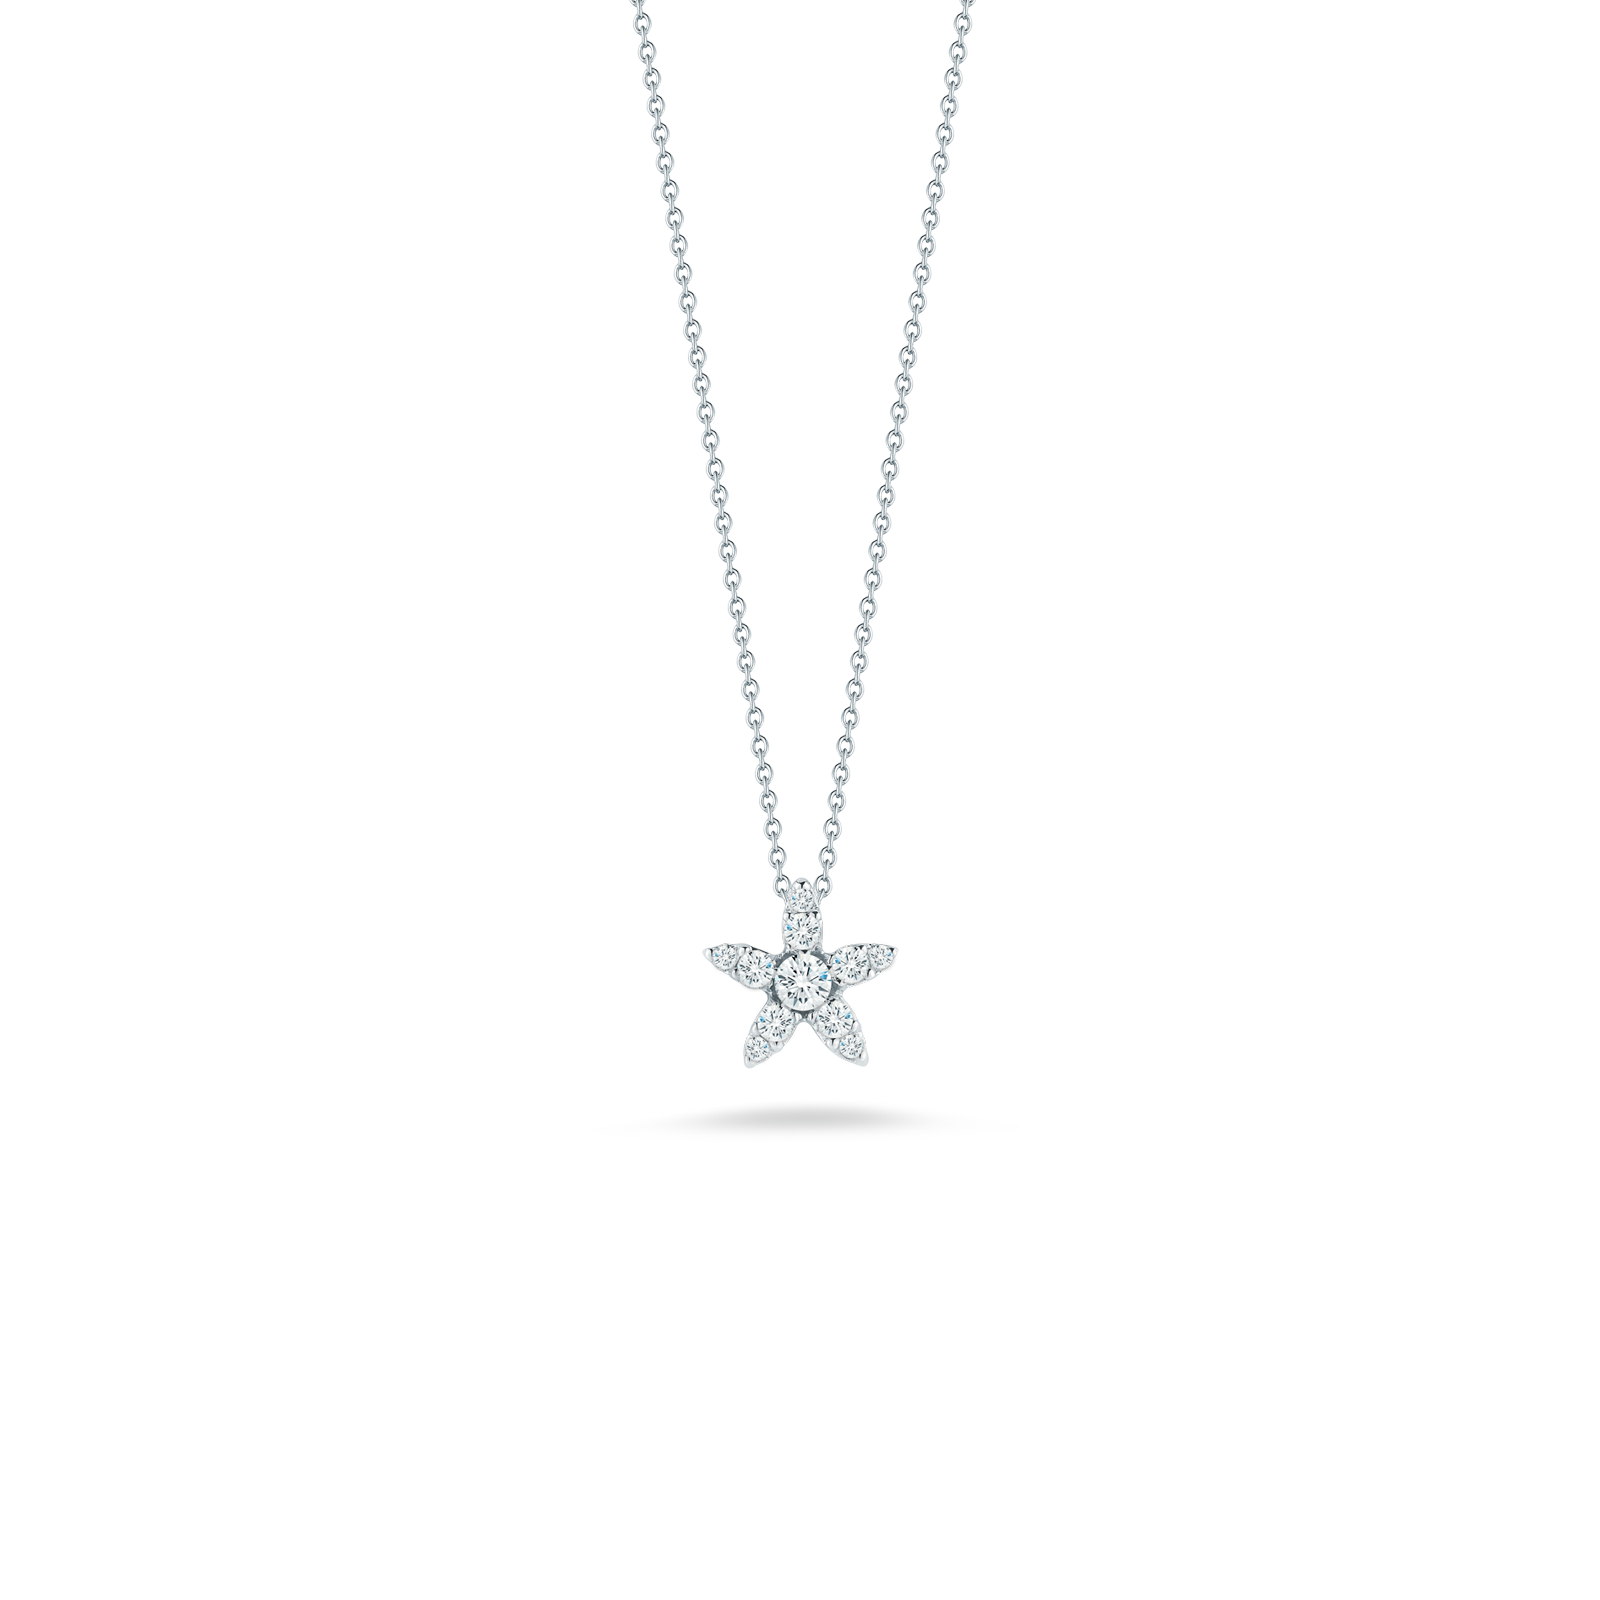 Necklace Diamond HD Image Free PNG Image